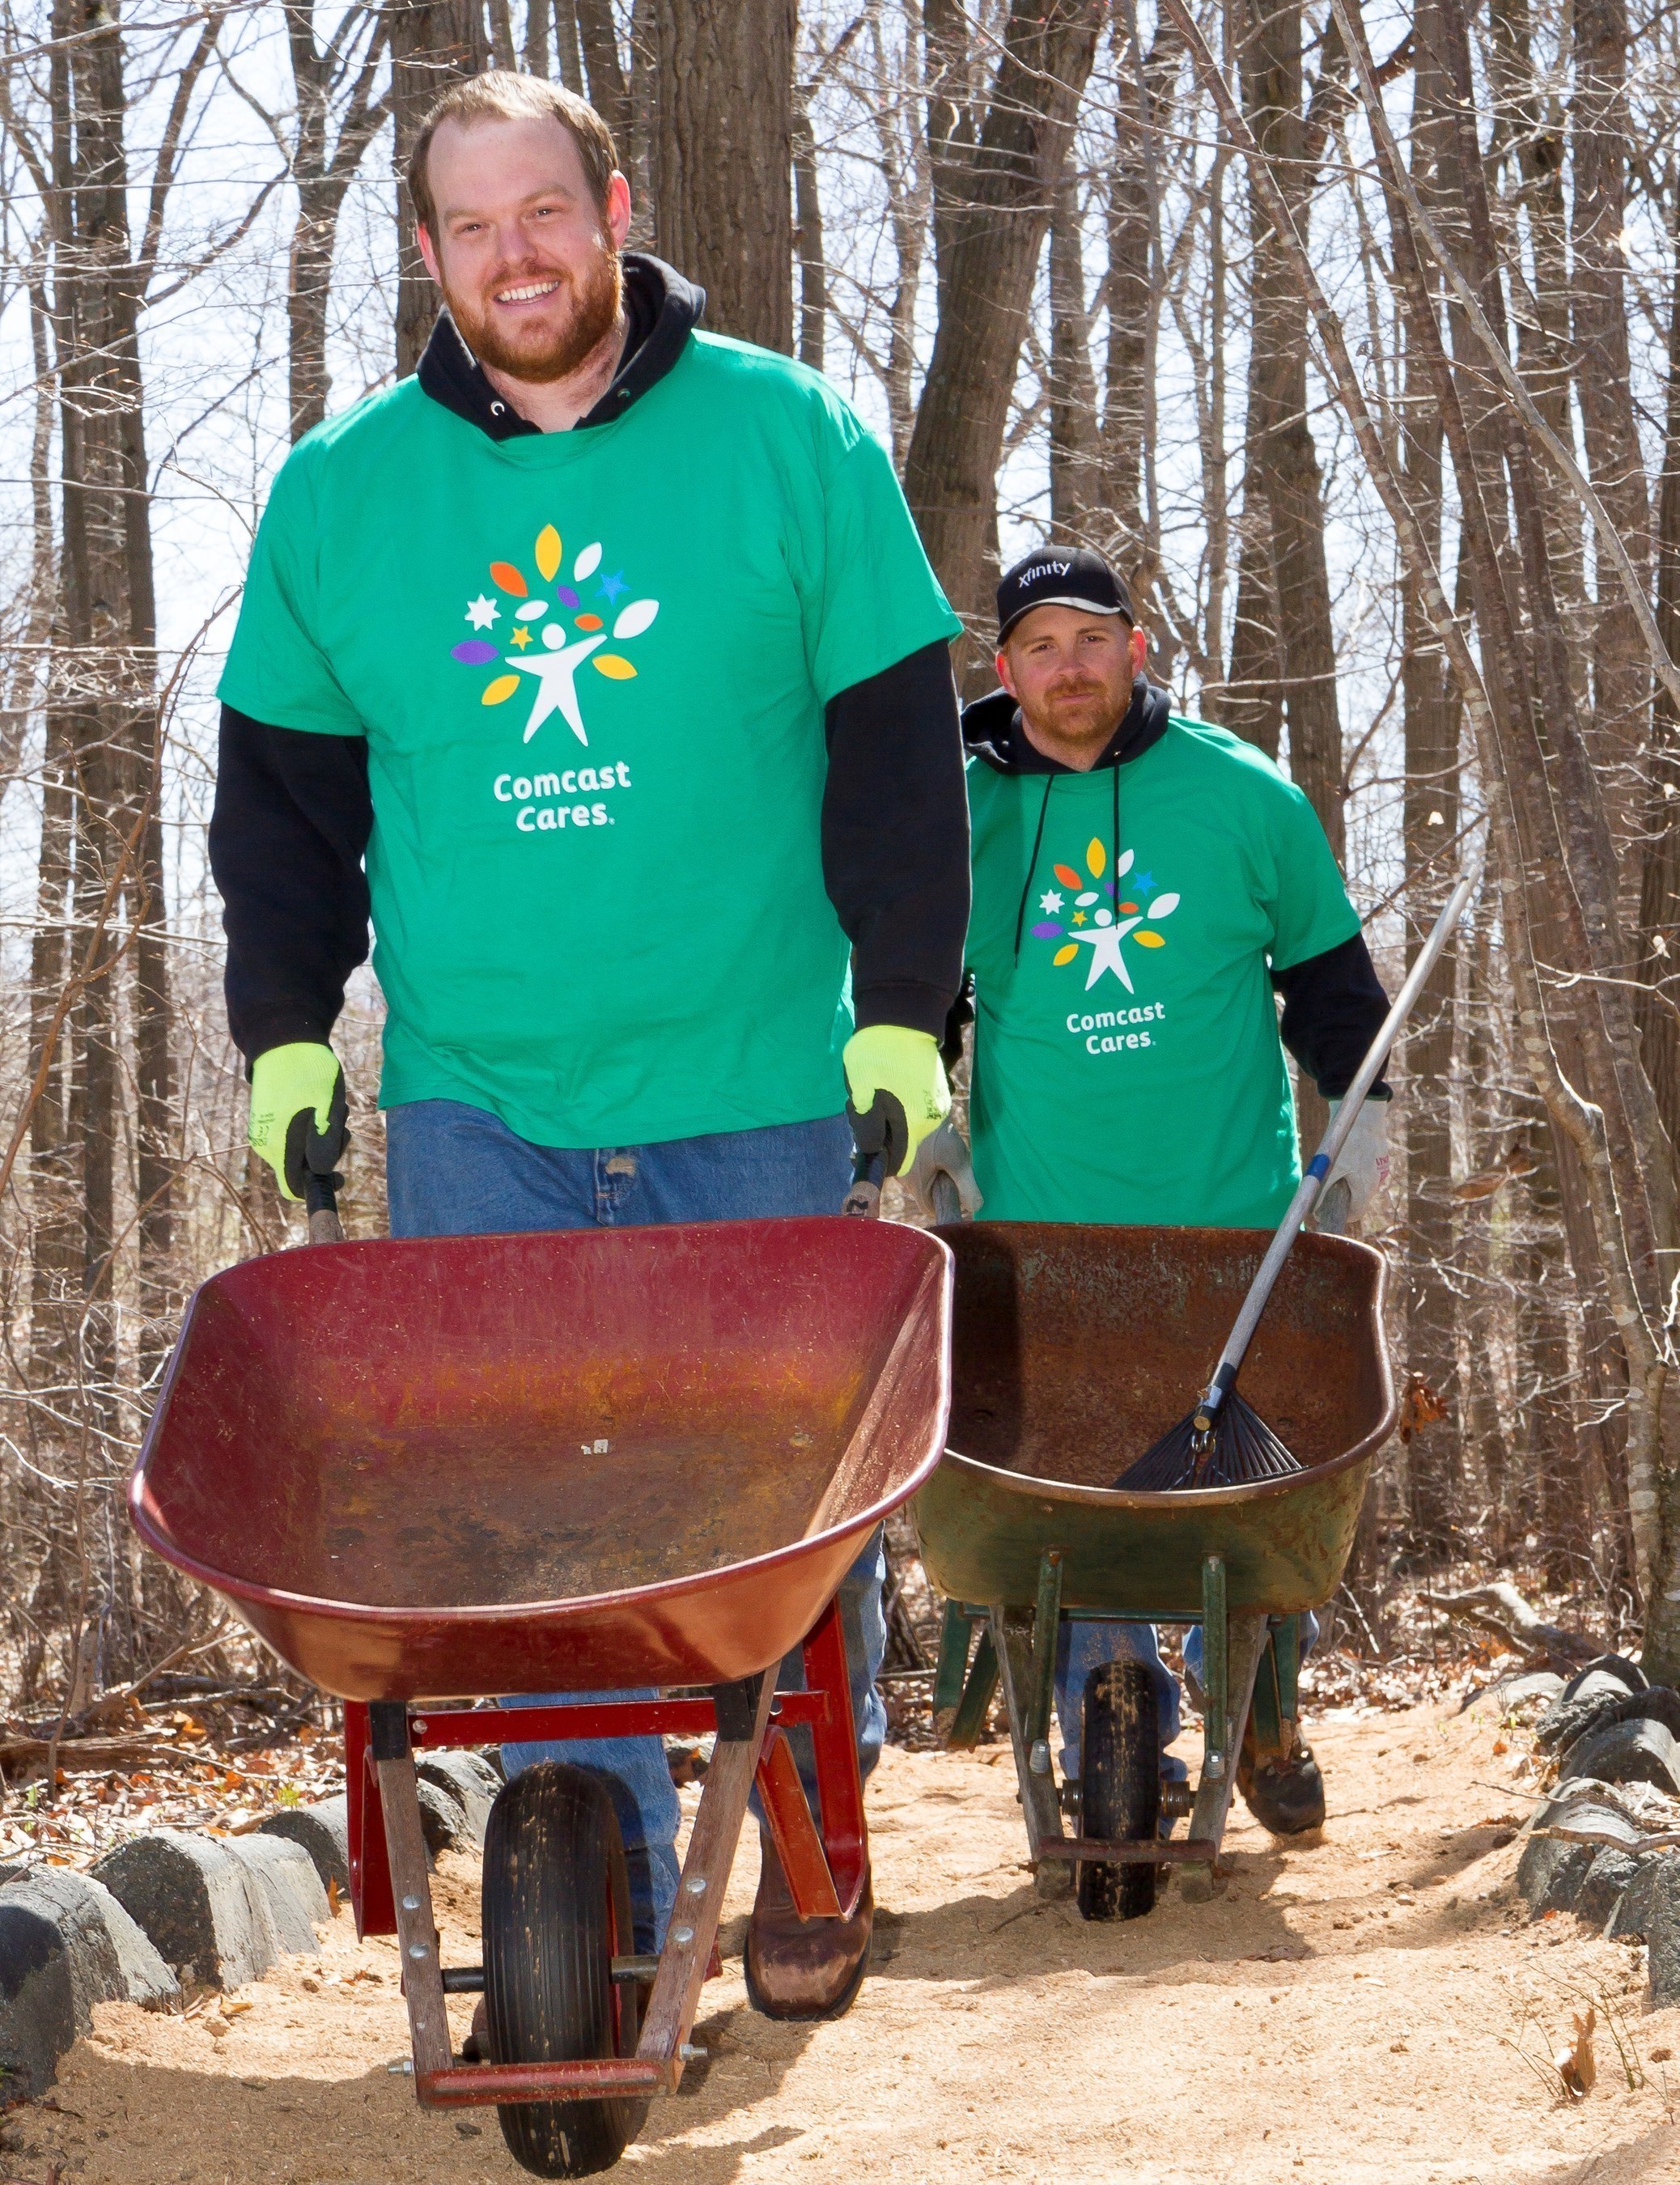 More than 650 local Comcast NBCUniversal employees and their families, friends and community partners will "make change happen" as they volunteer to improve eight sites across Connecticut as part of the 15th annual Comcast Cares Day.